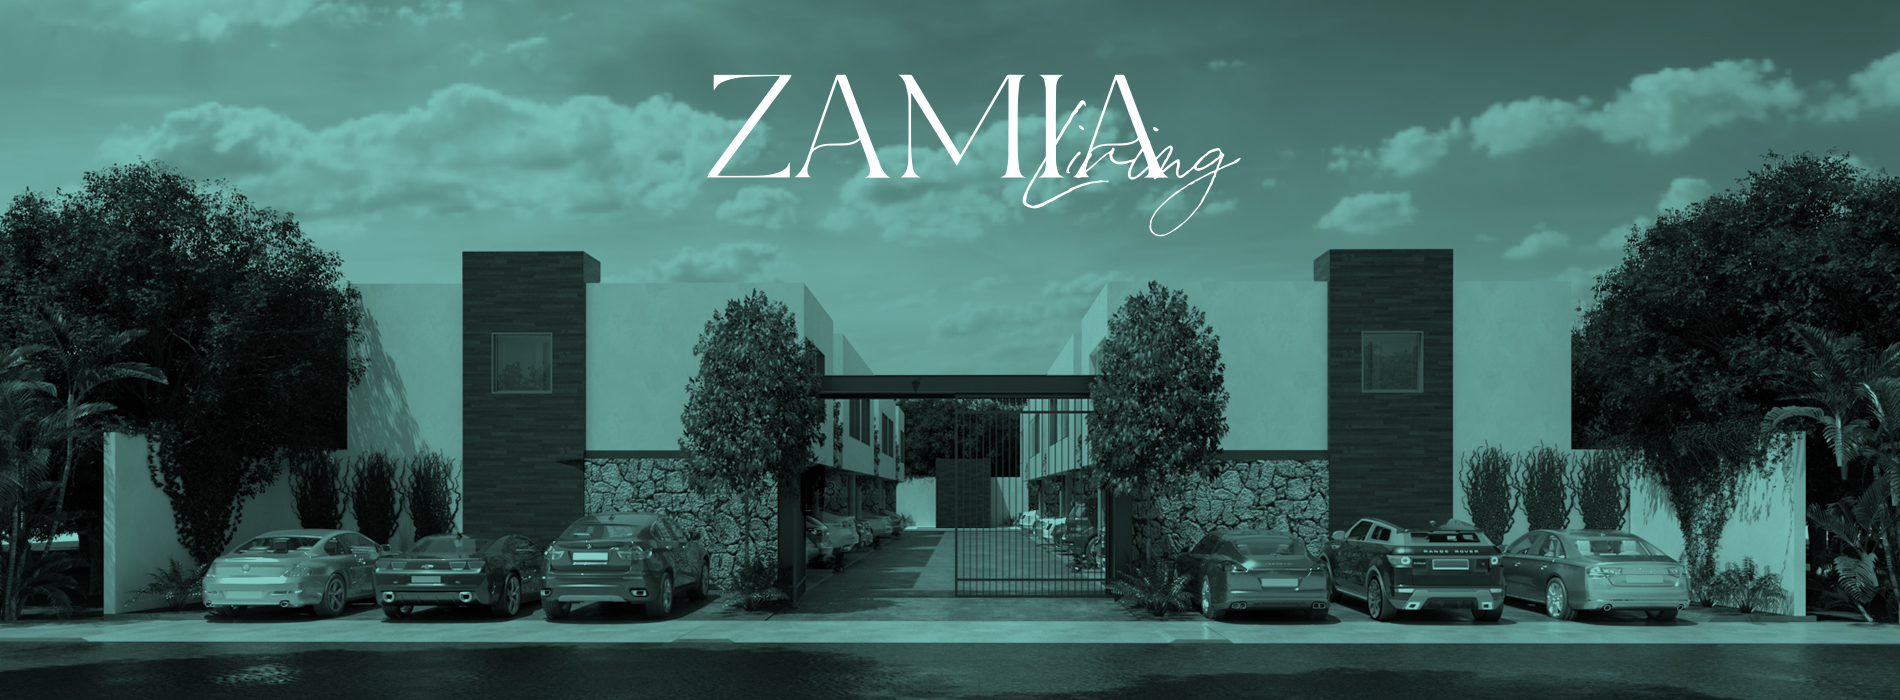 Zamia Living Goodlers